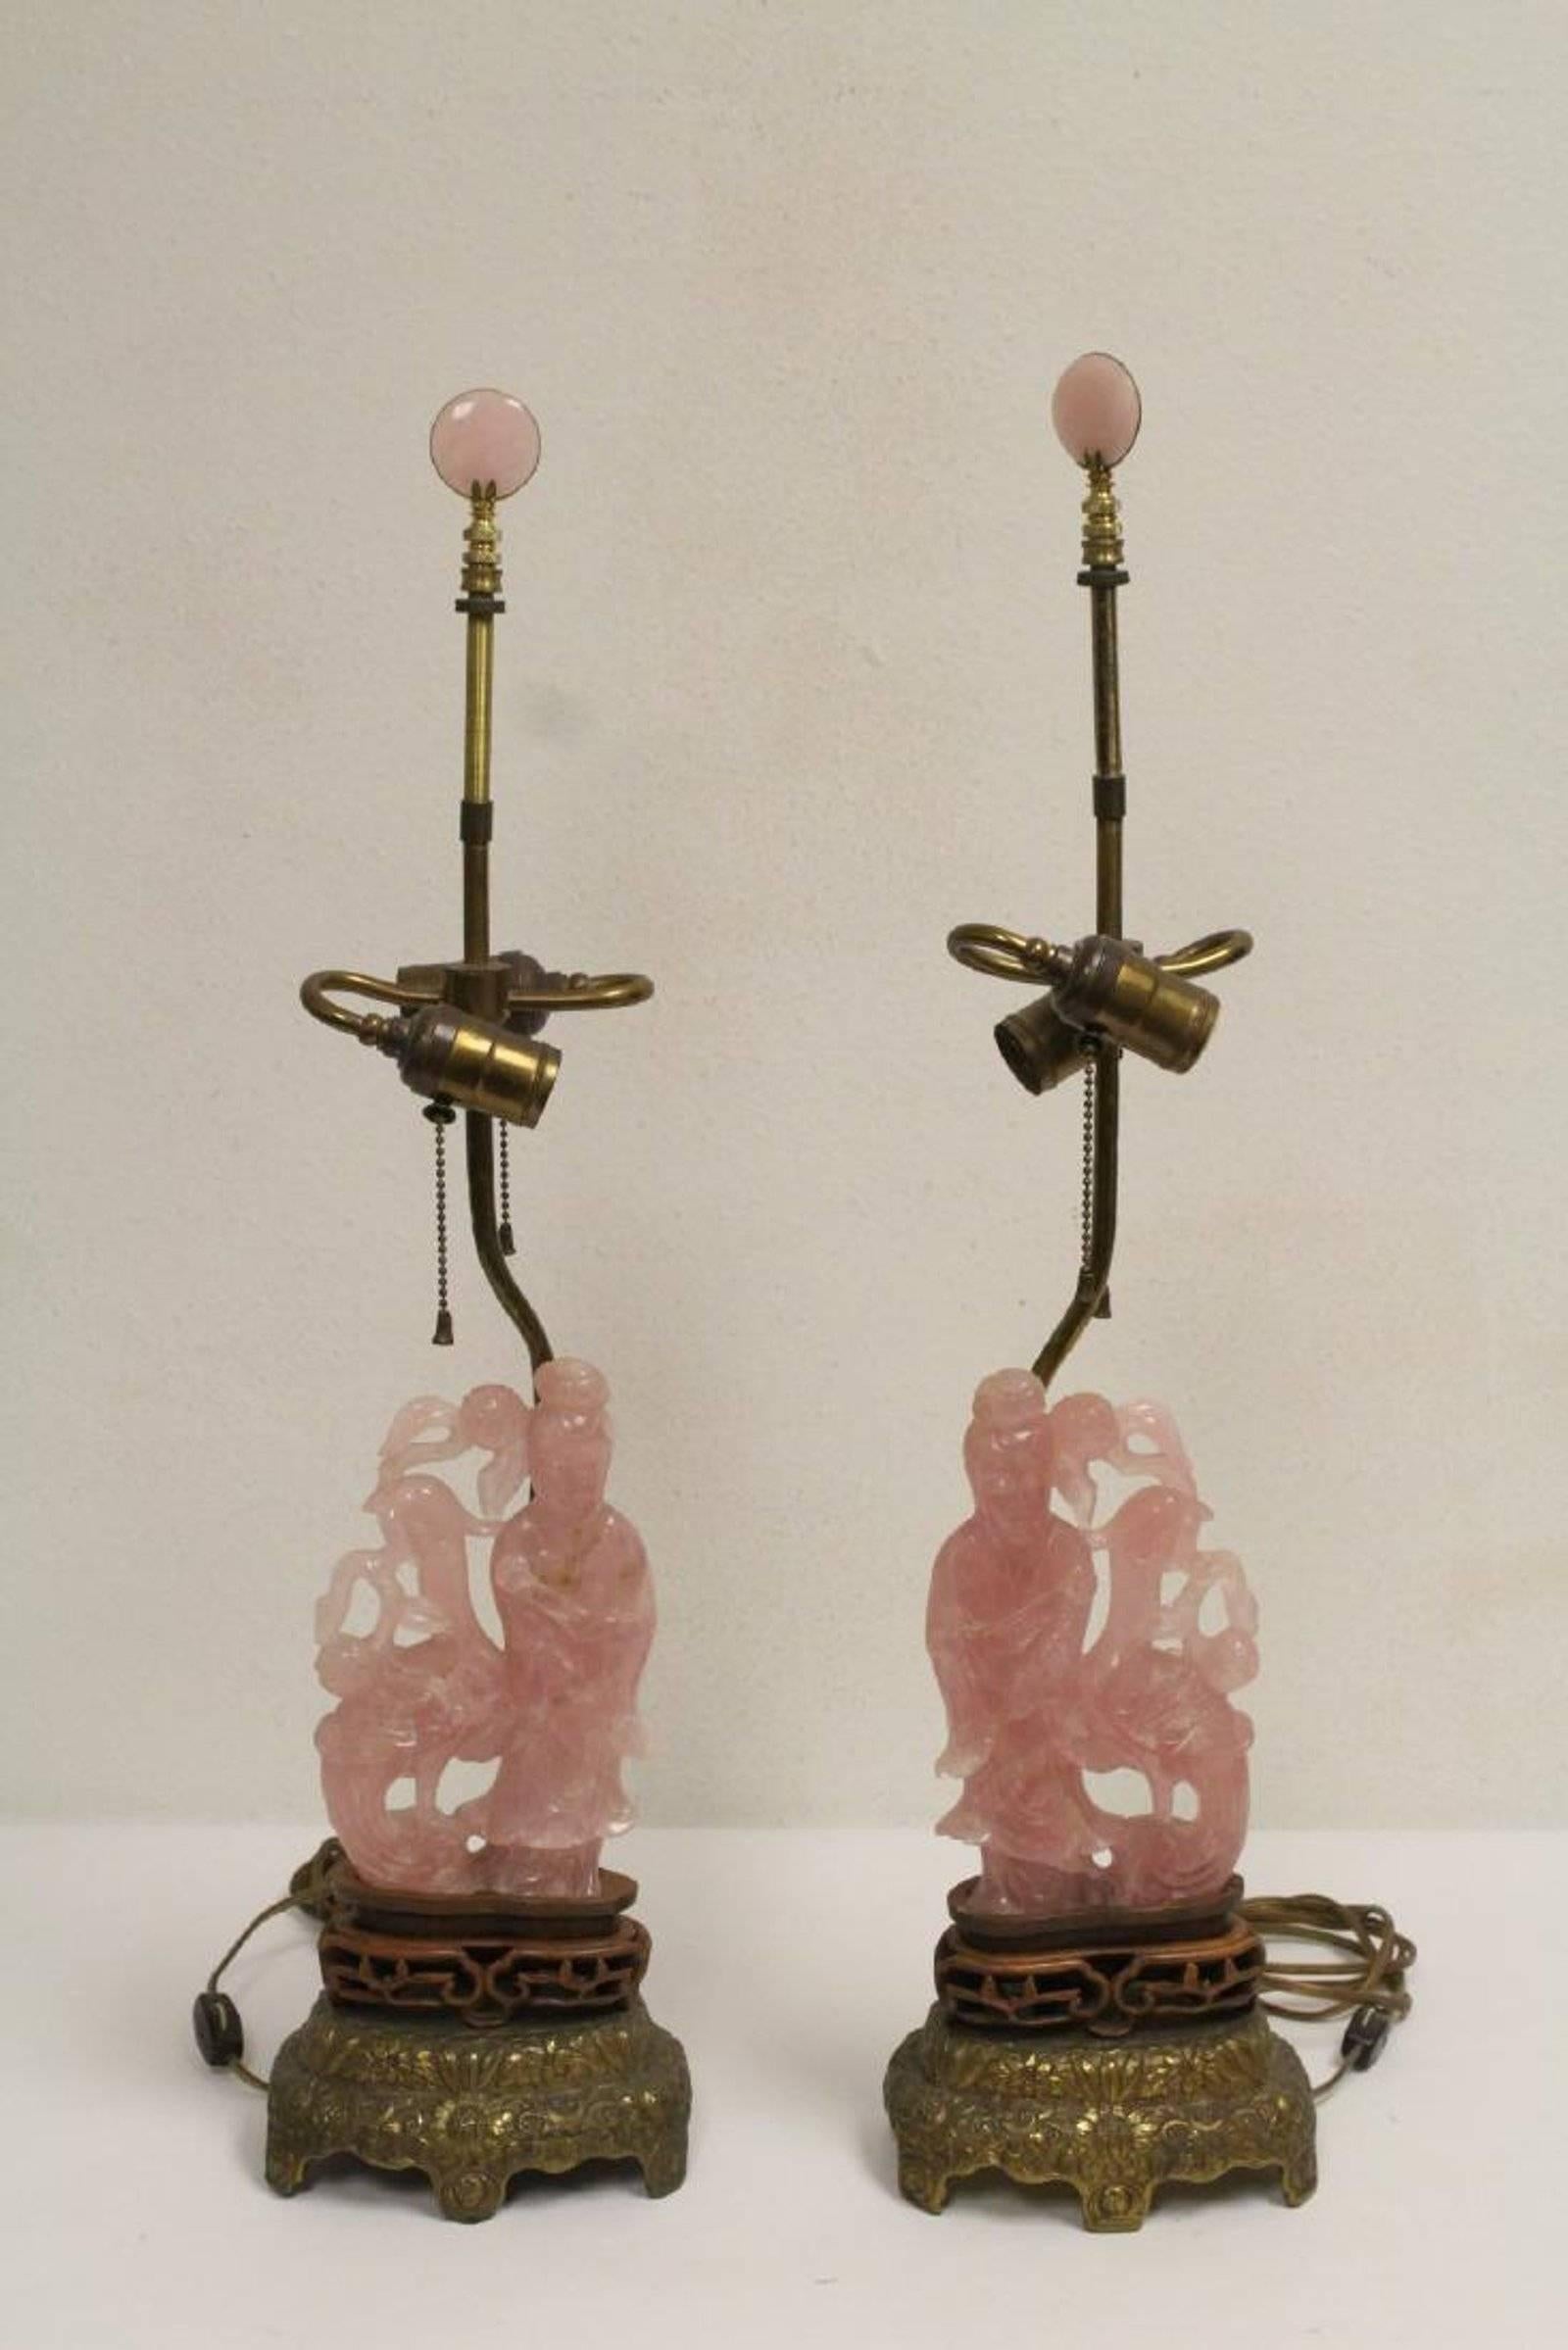 Attractive antique pair of Chinese hand-carved and polished translucent rose quartz carving of a standing Guanyins with phoenix birds mounted to lamps with custom shades and rose quartz finials.

The rose quartz Guanyins dimensions is H. 8 in x W.